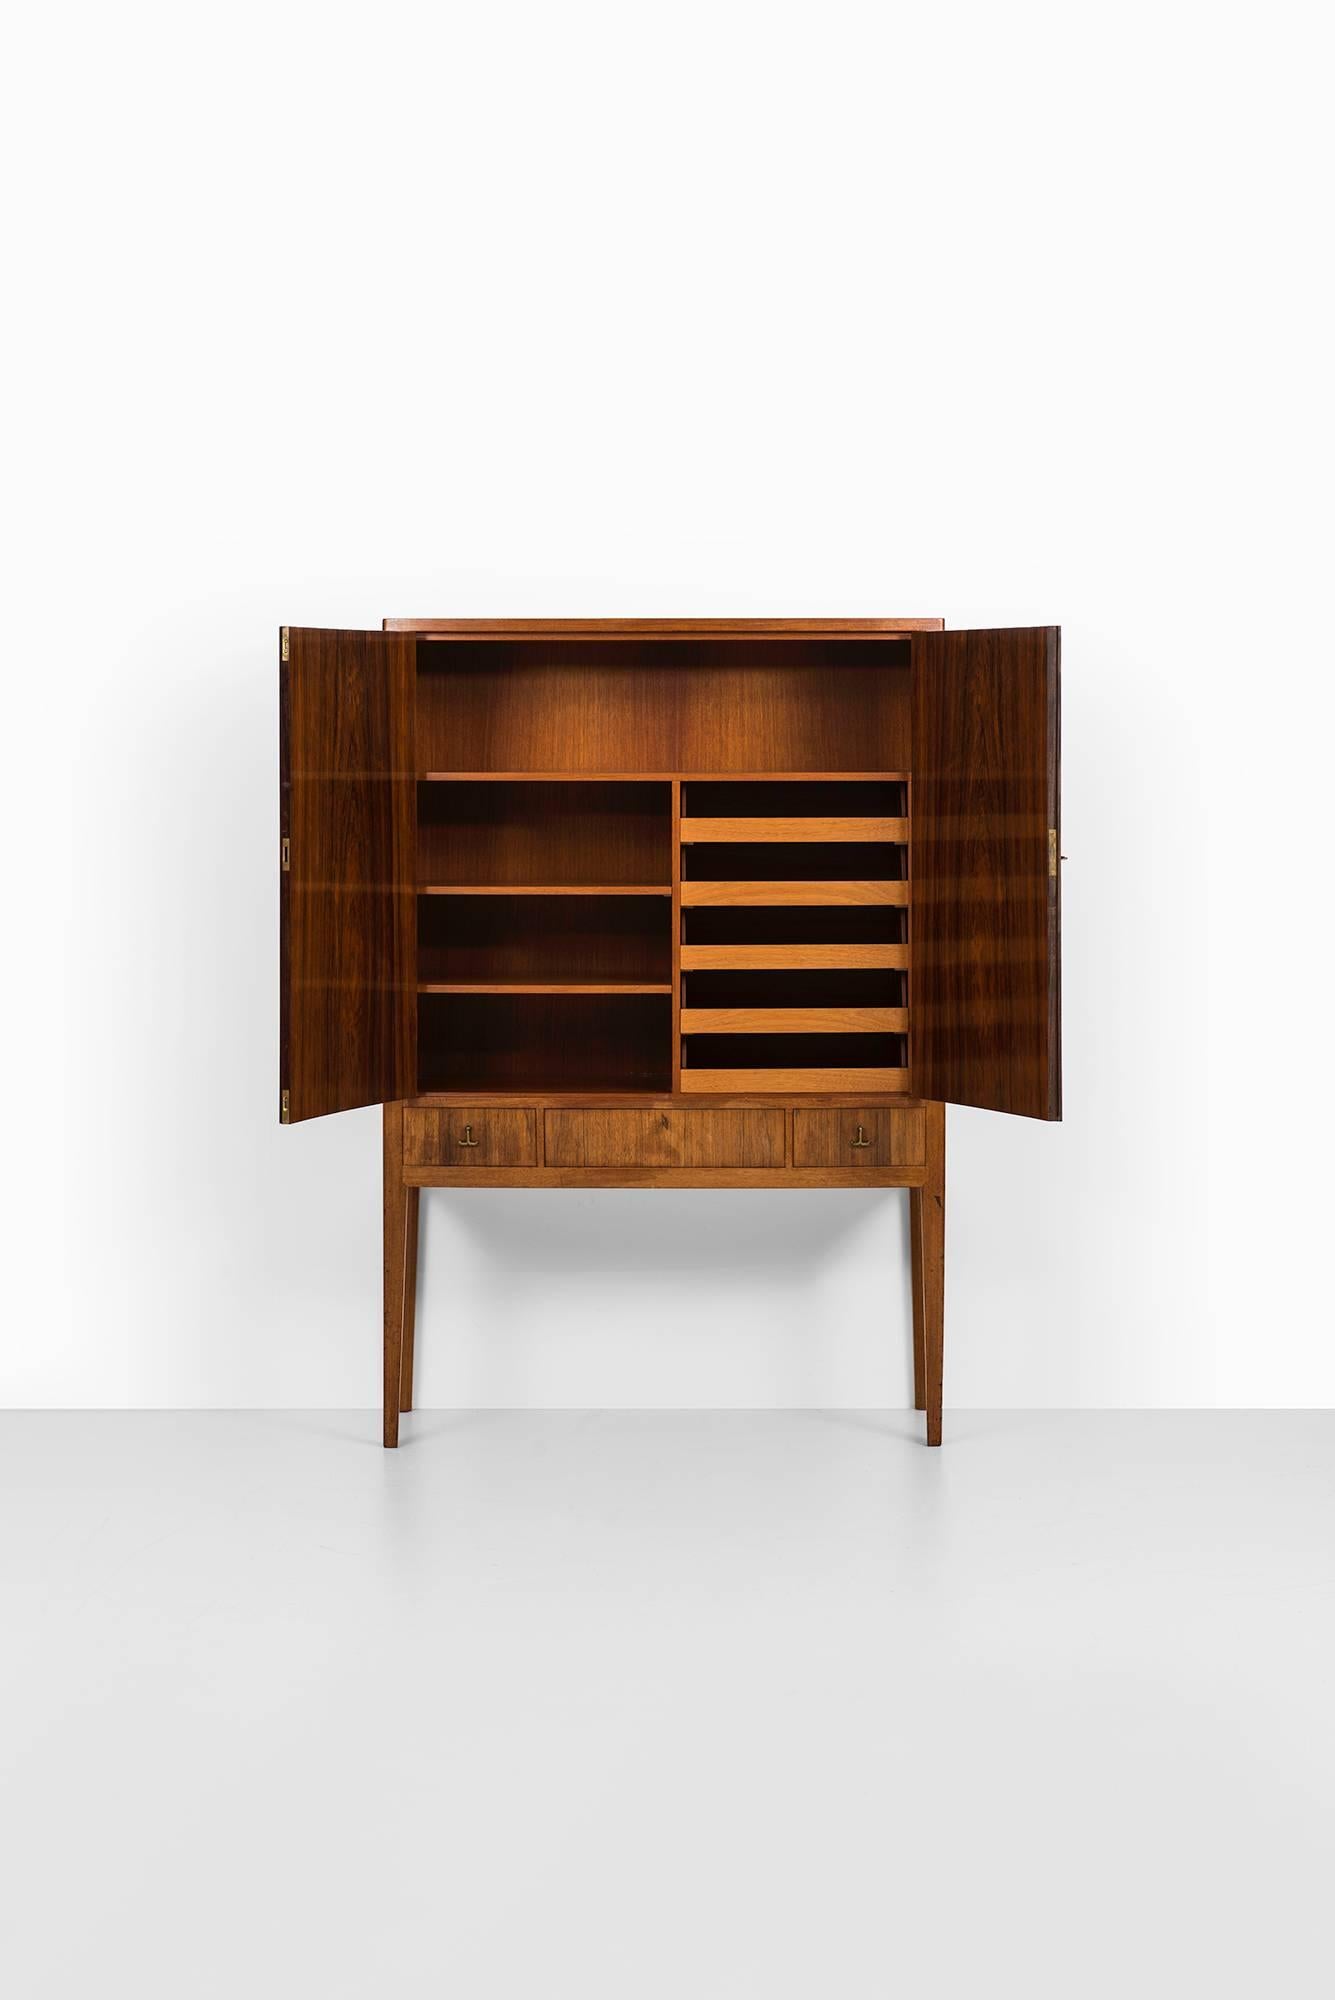 Apprentice examination unique cabinet in rosewood in very high quality. Produced in Sweden.